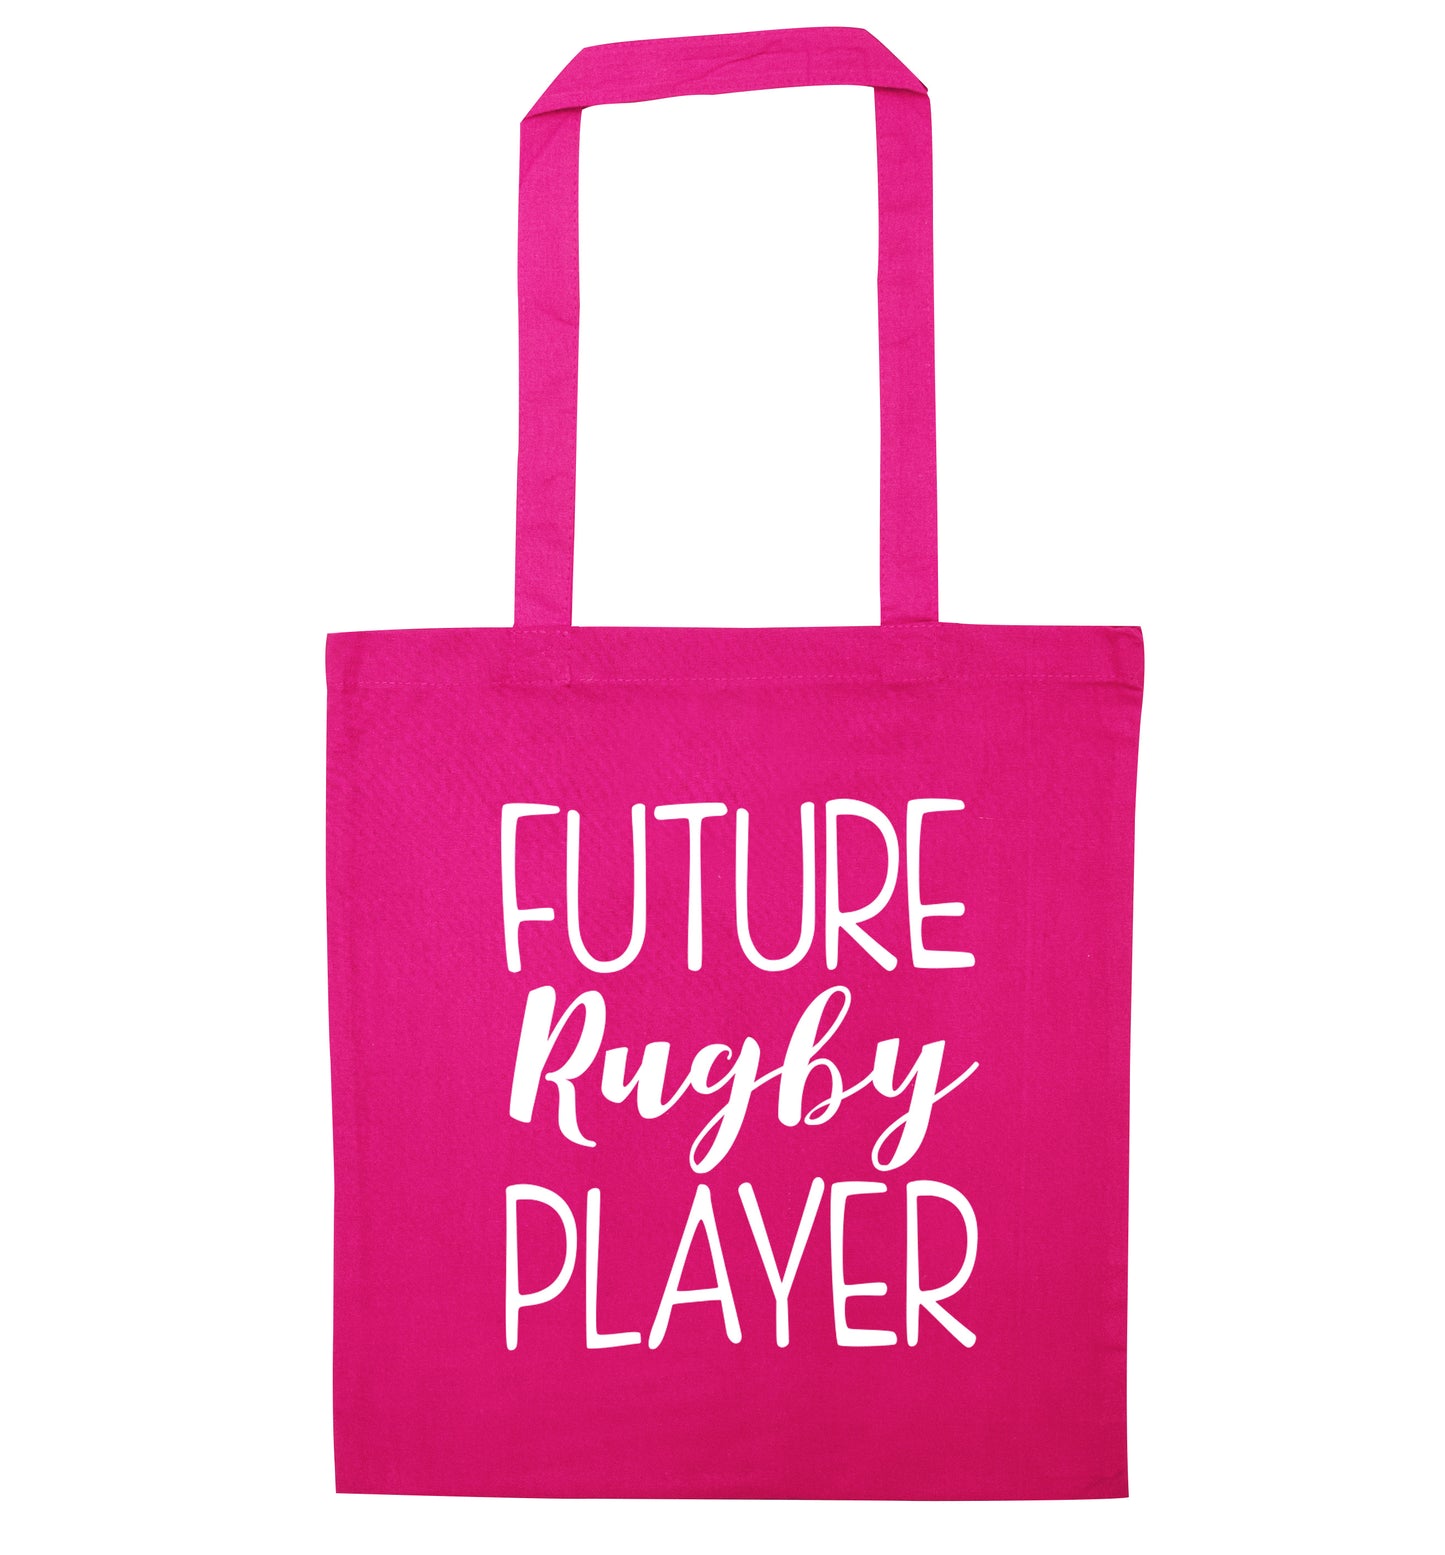 Future rugby player pink tote bag